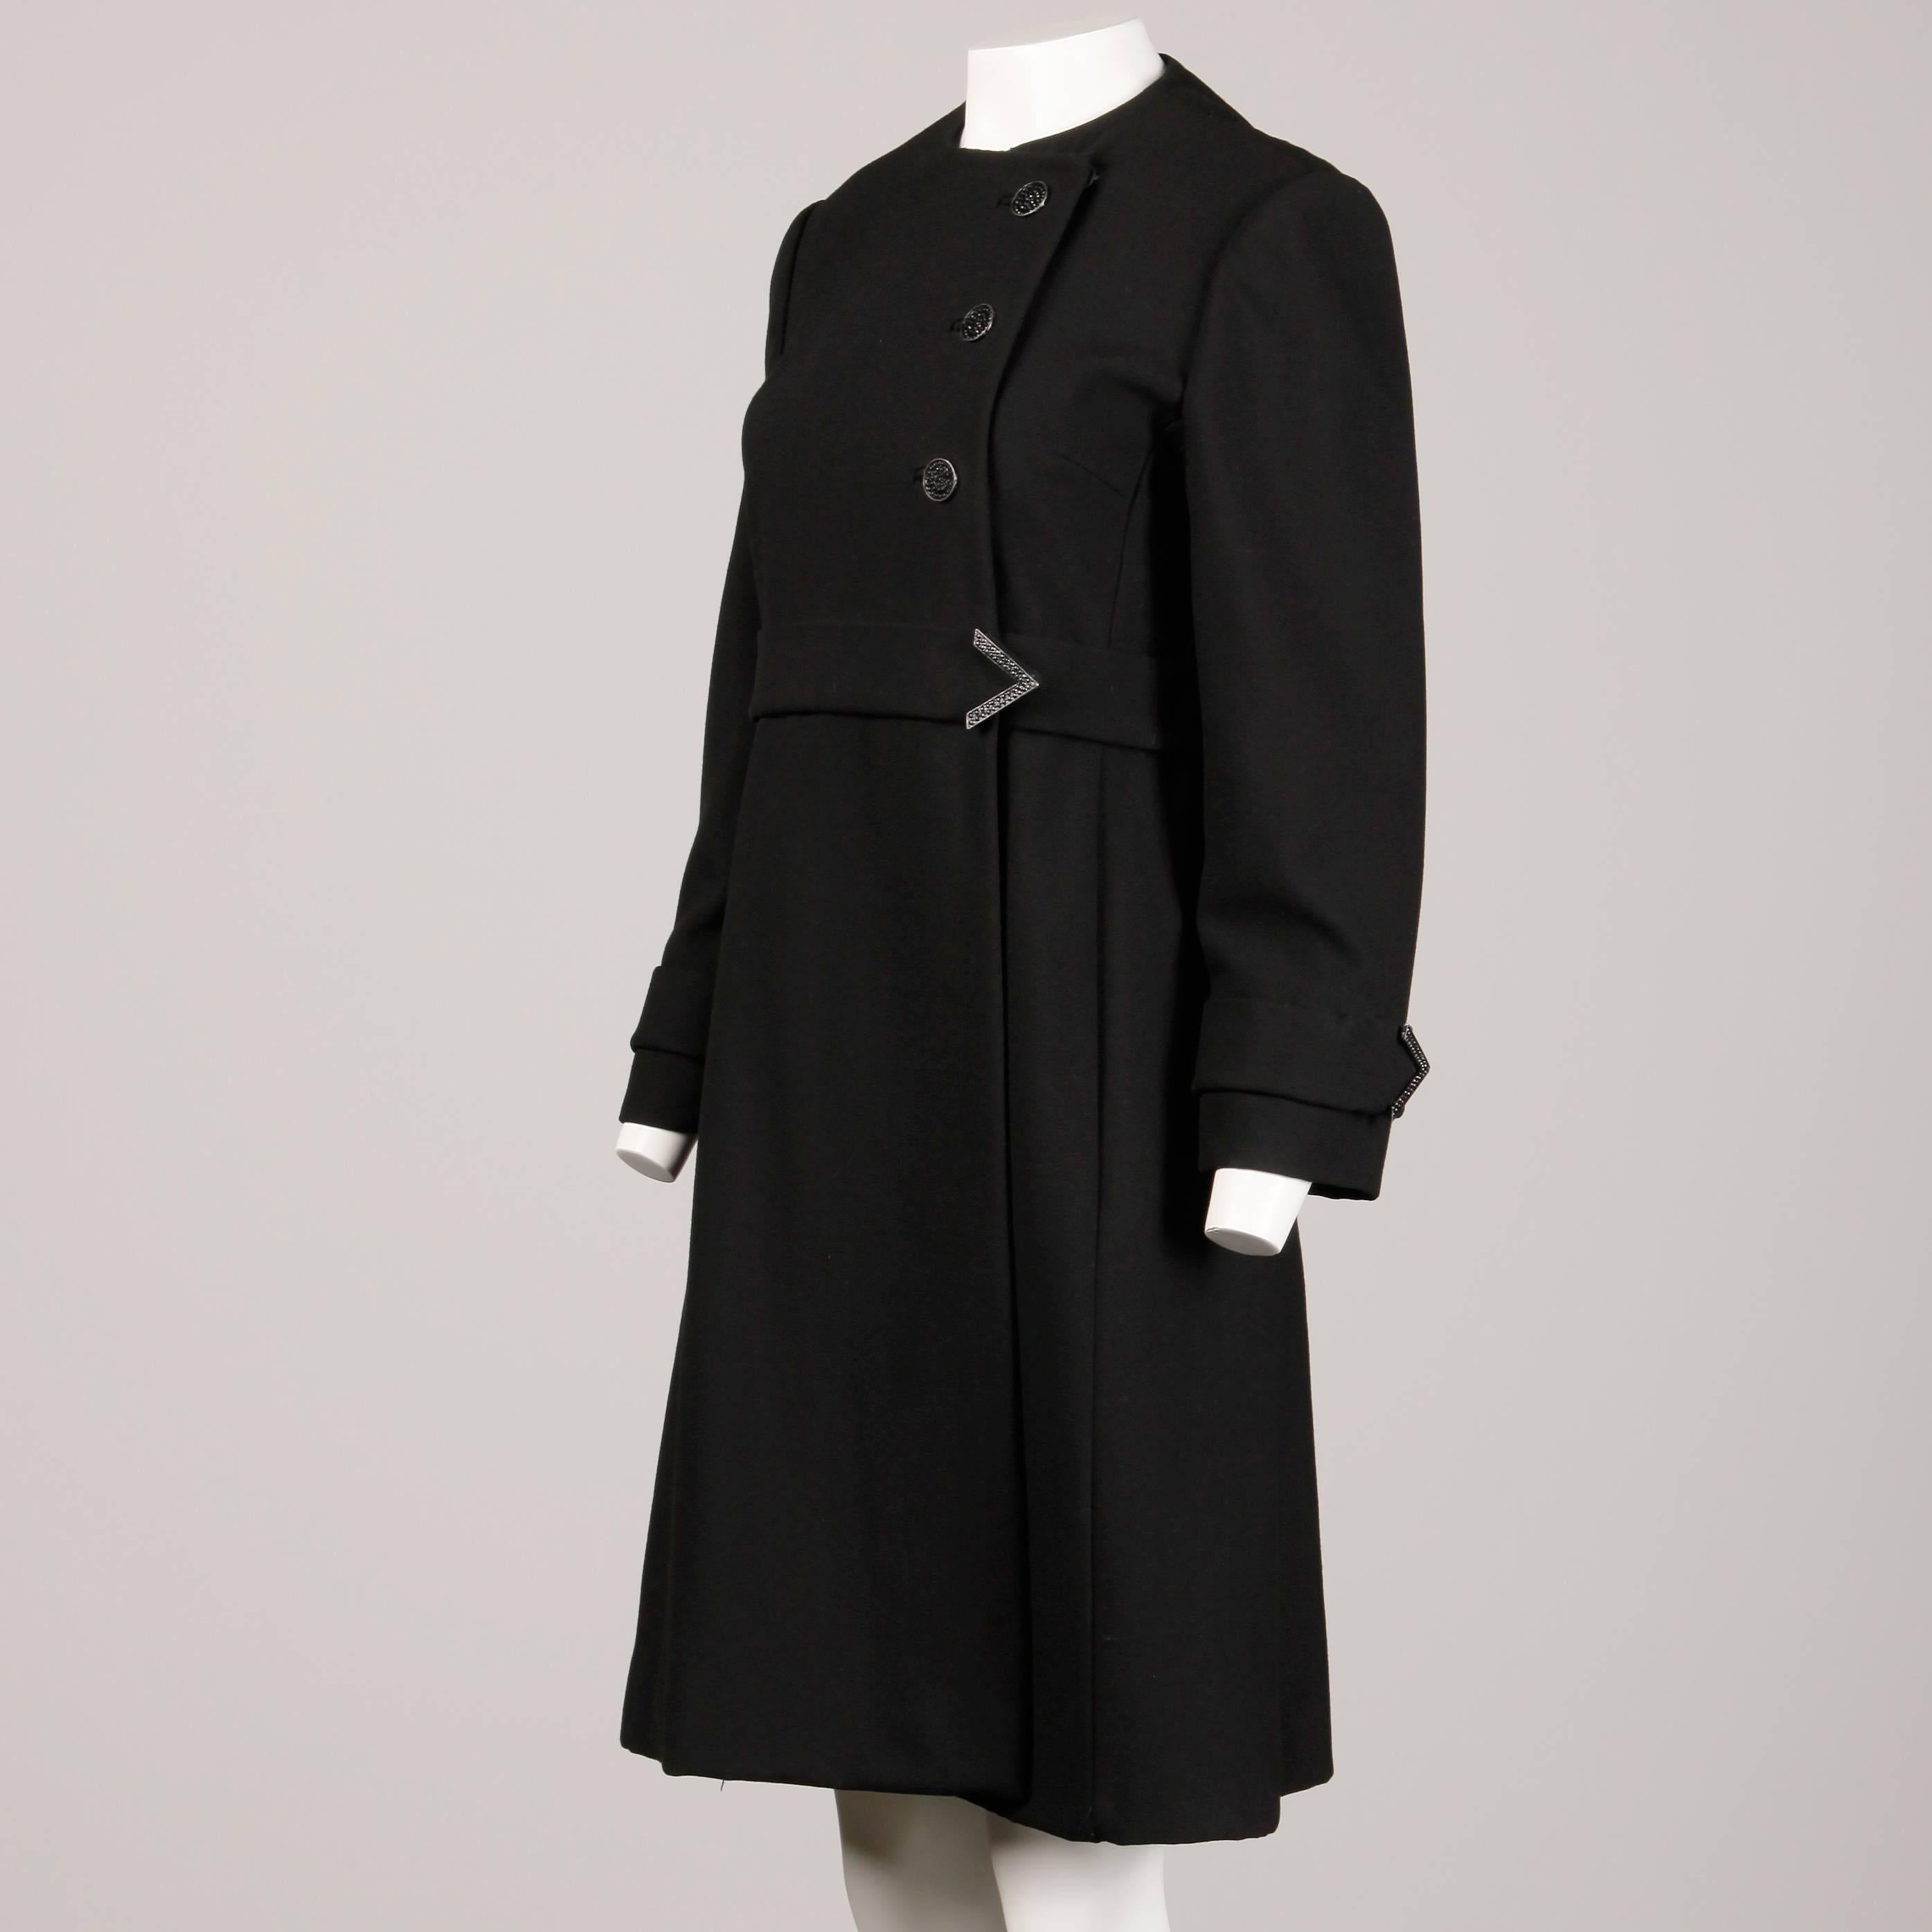 Vintage 1960s black wool coat by Youthcraft with asymmetric closure. Fully lined with asymmetric front button and snap closure. Front hidden pockets. Structured shoulder pads sewn in underneath the lining. Fits like a modern size small-medium. The